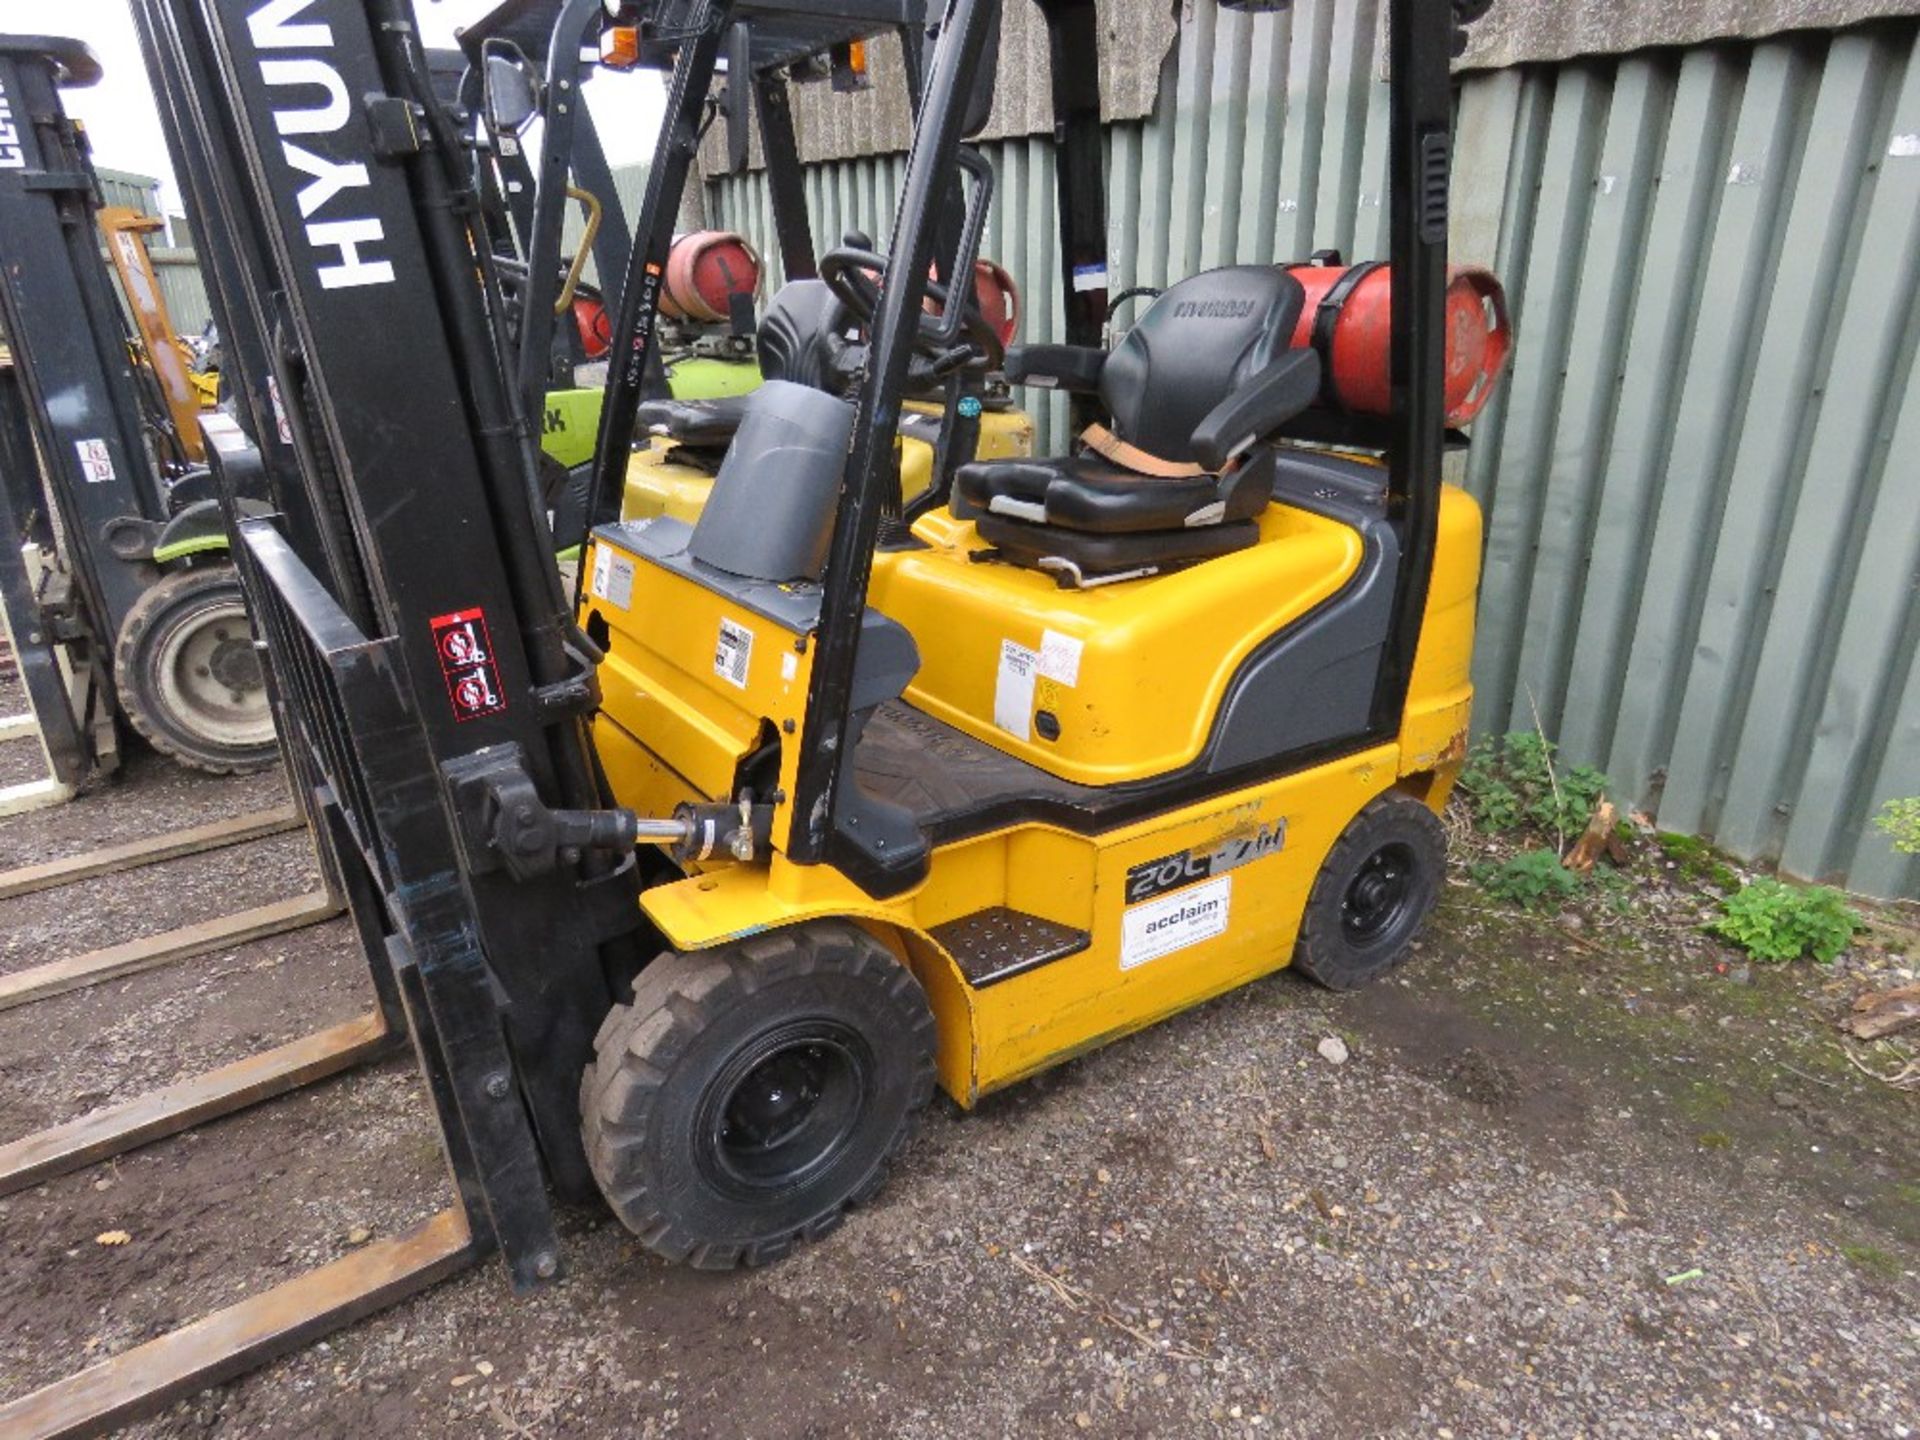 HYUNDAI 20L-7M GAS POWERED FORKLIFT TRUCK, YEAR 2018. 1600 REC HOURS APPROX. EXTRA SERVICE. - Image 3 of 11